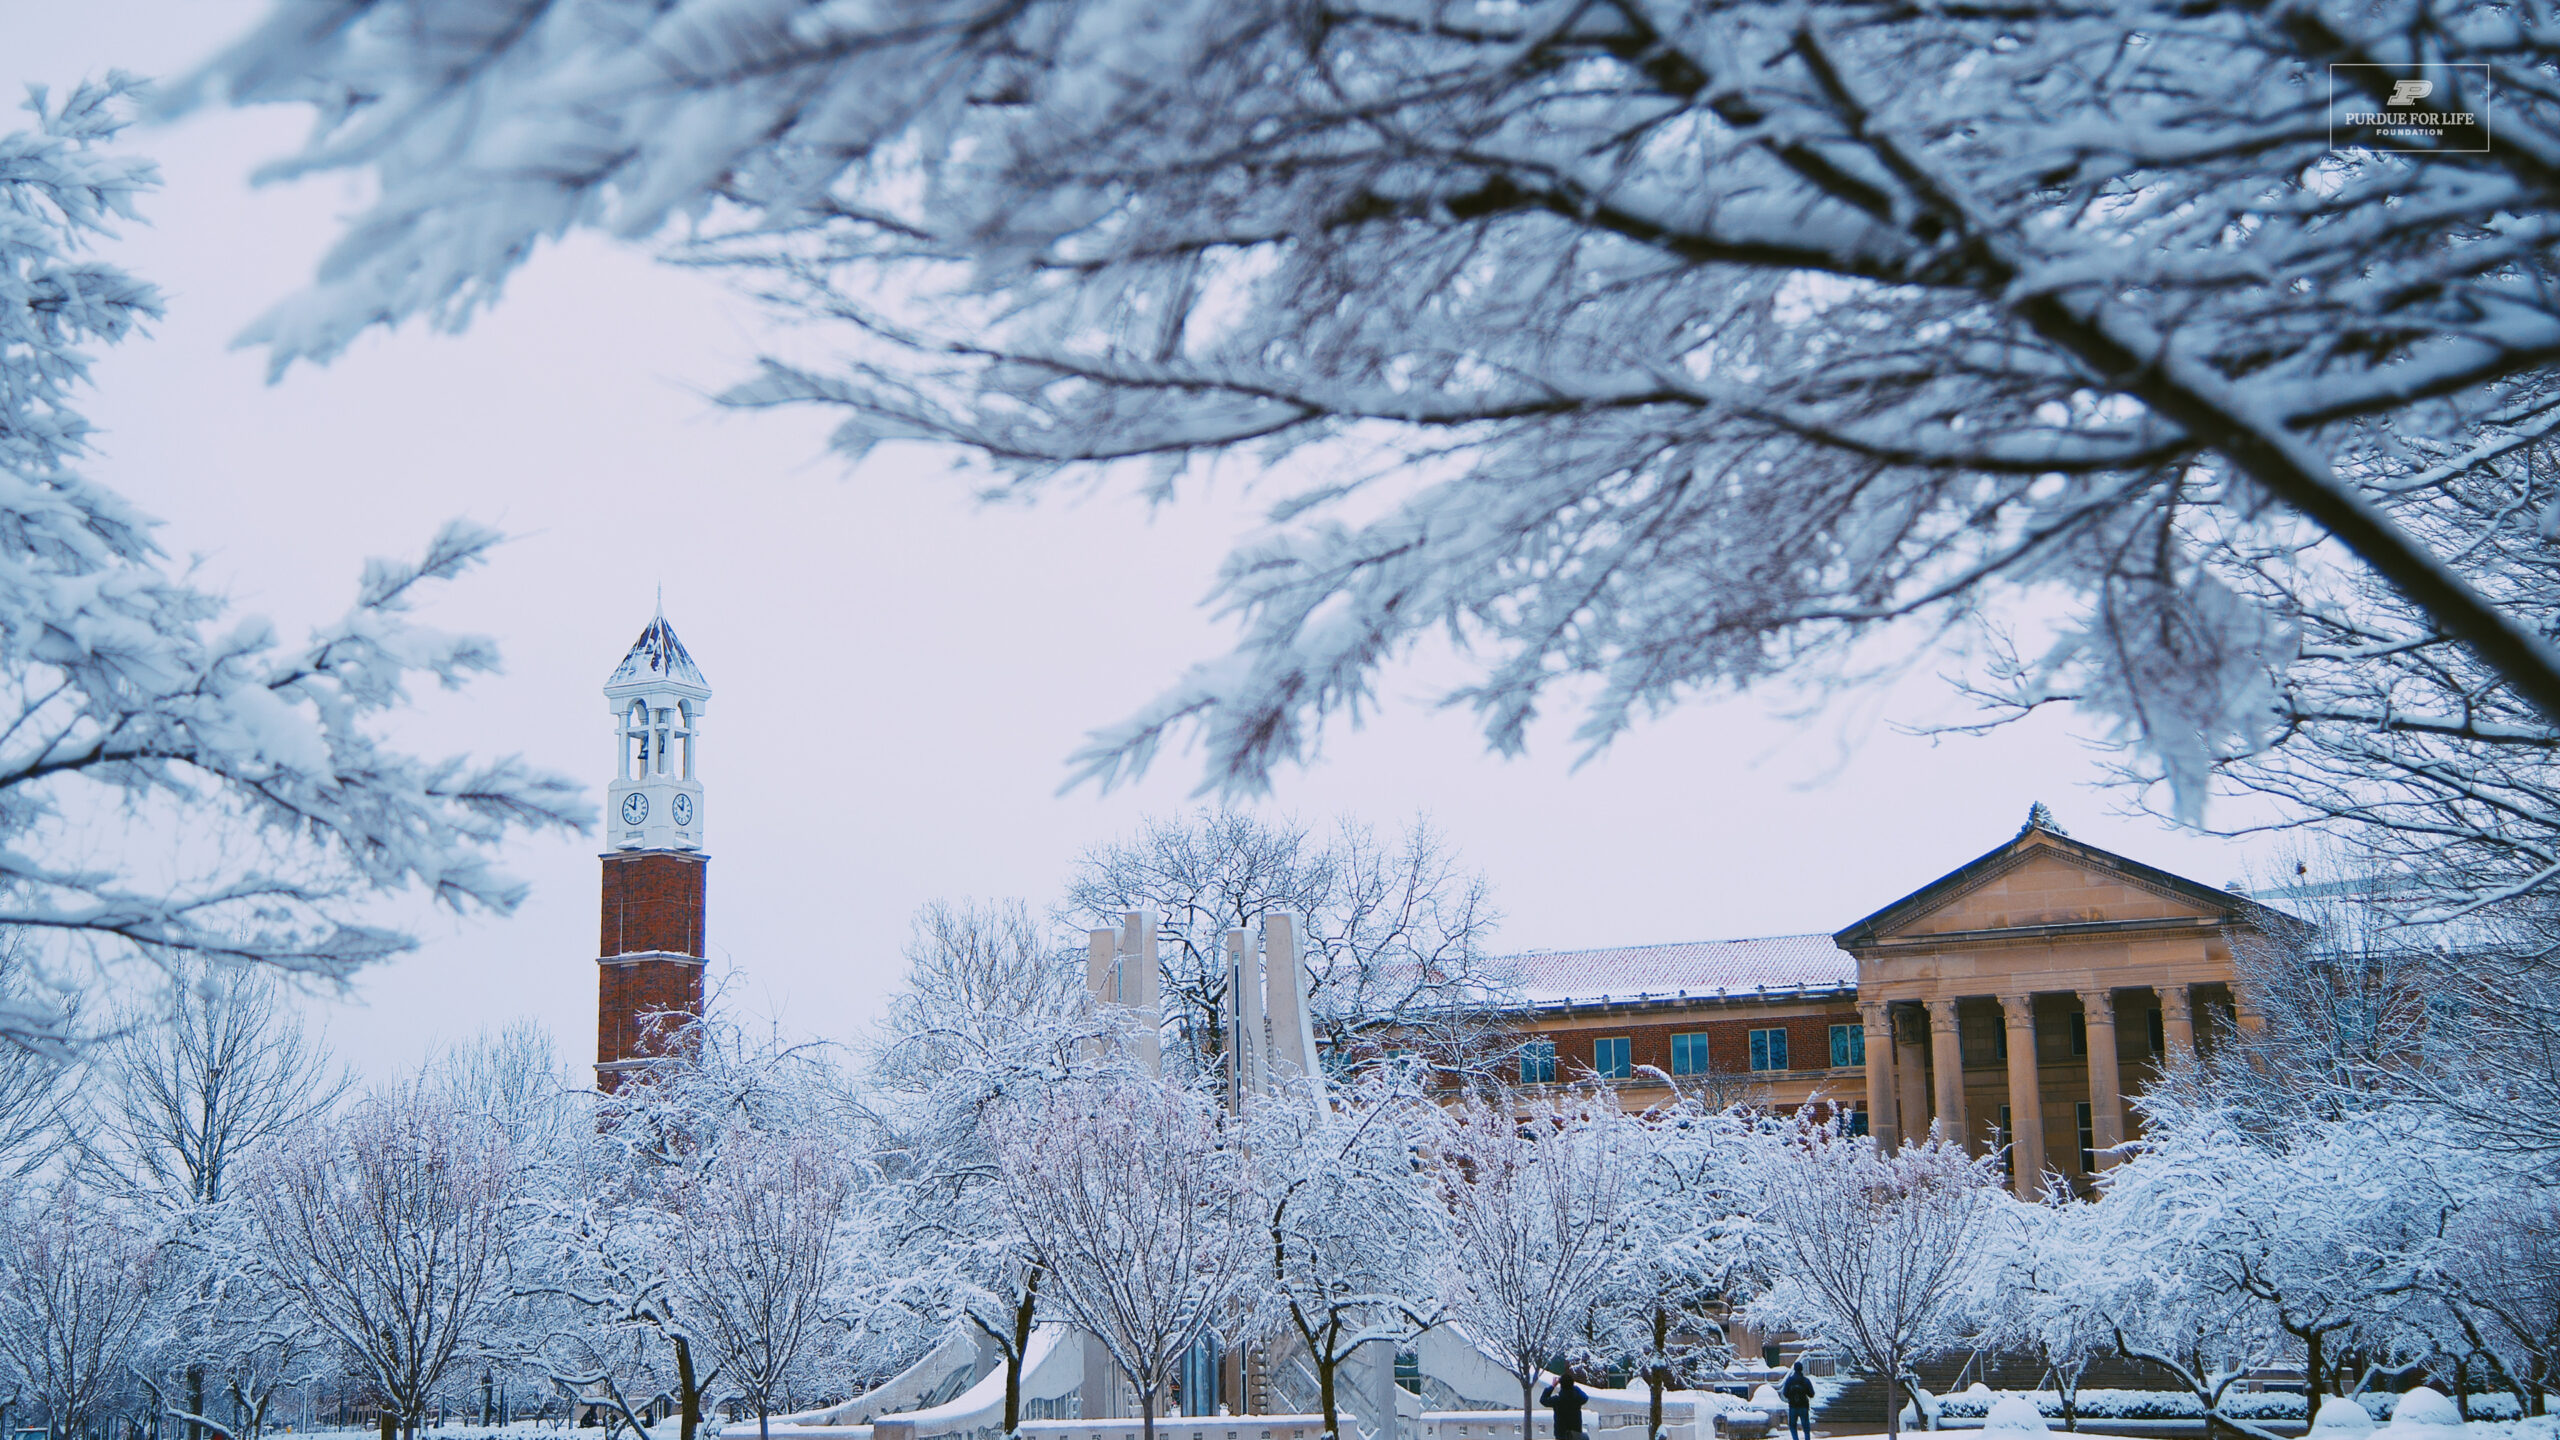 Purdue University campus during the winter time.